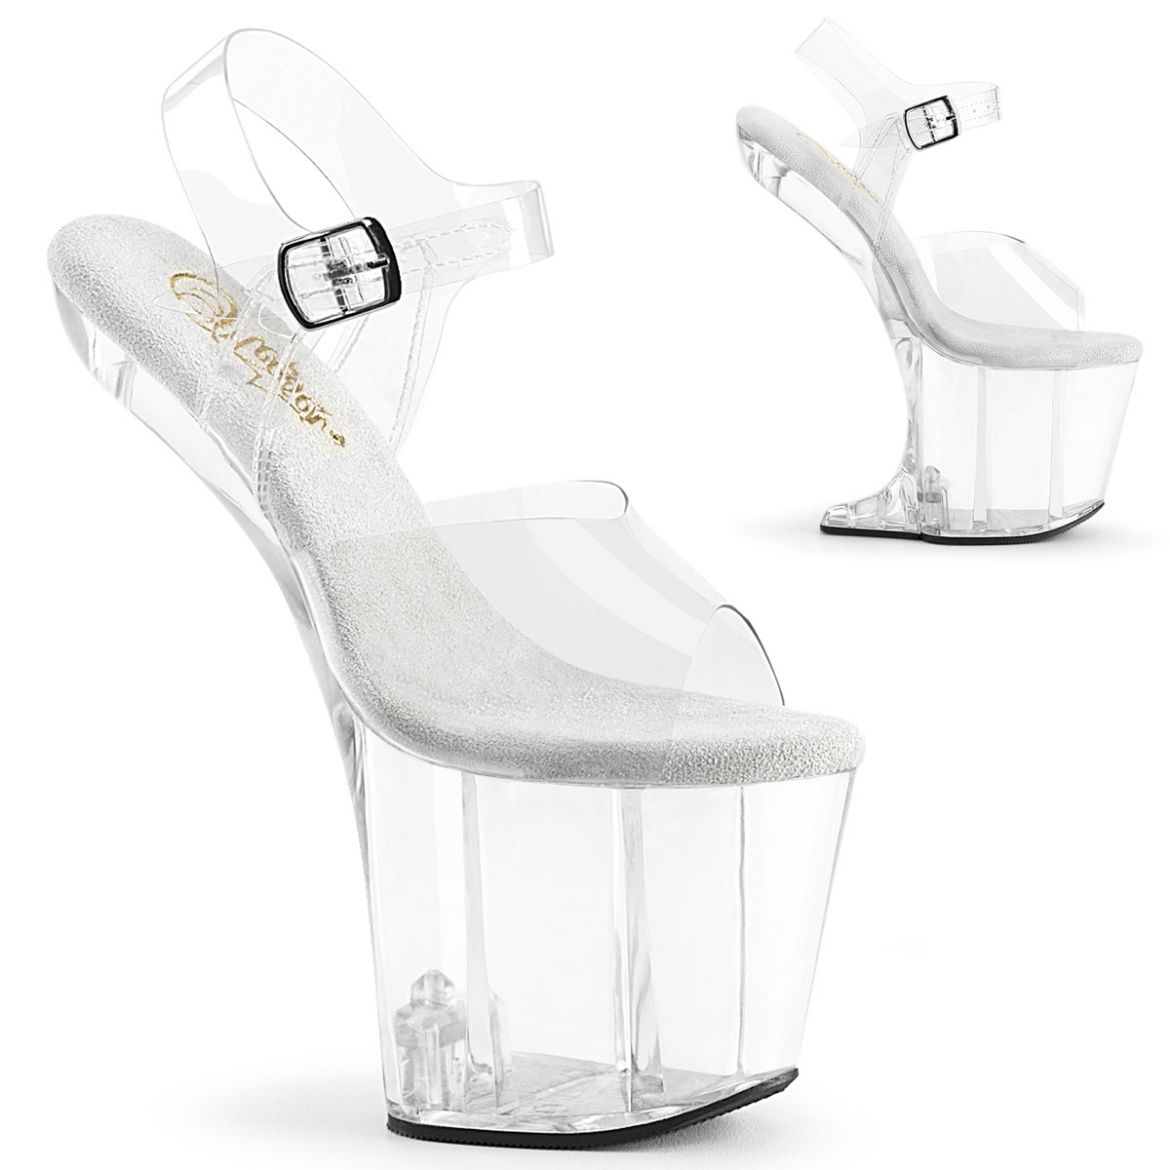 Product image of Pleaser CRAZE-808 Clr/Clr 8 Inch Heelless 3 Inch PF Ankle Strap Sandal